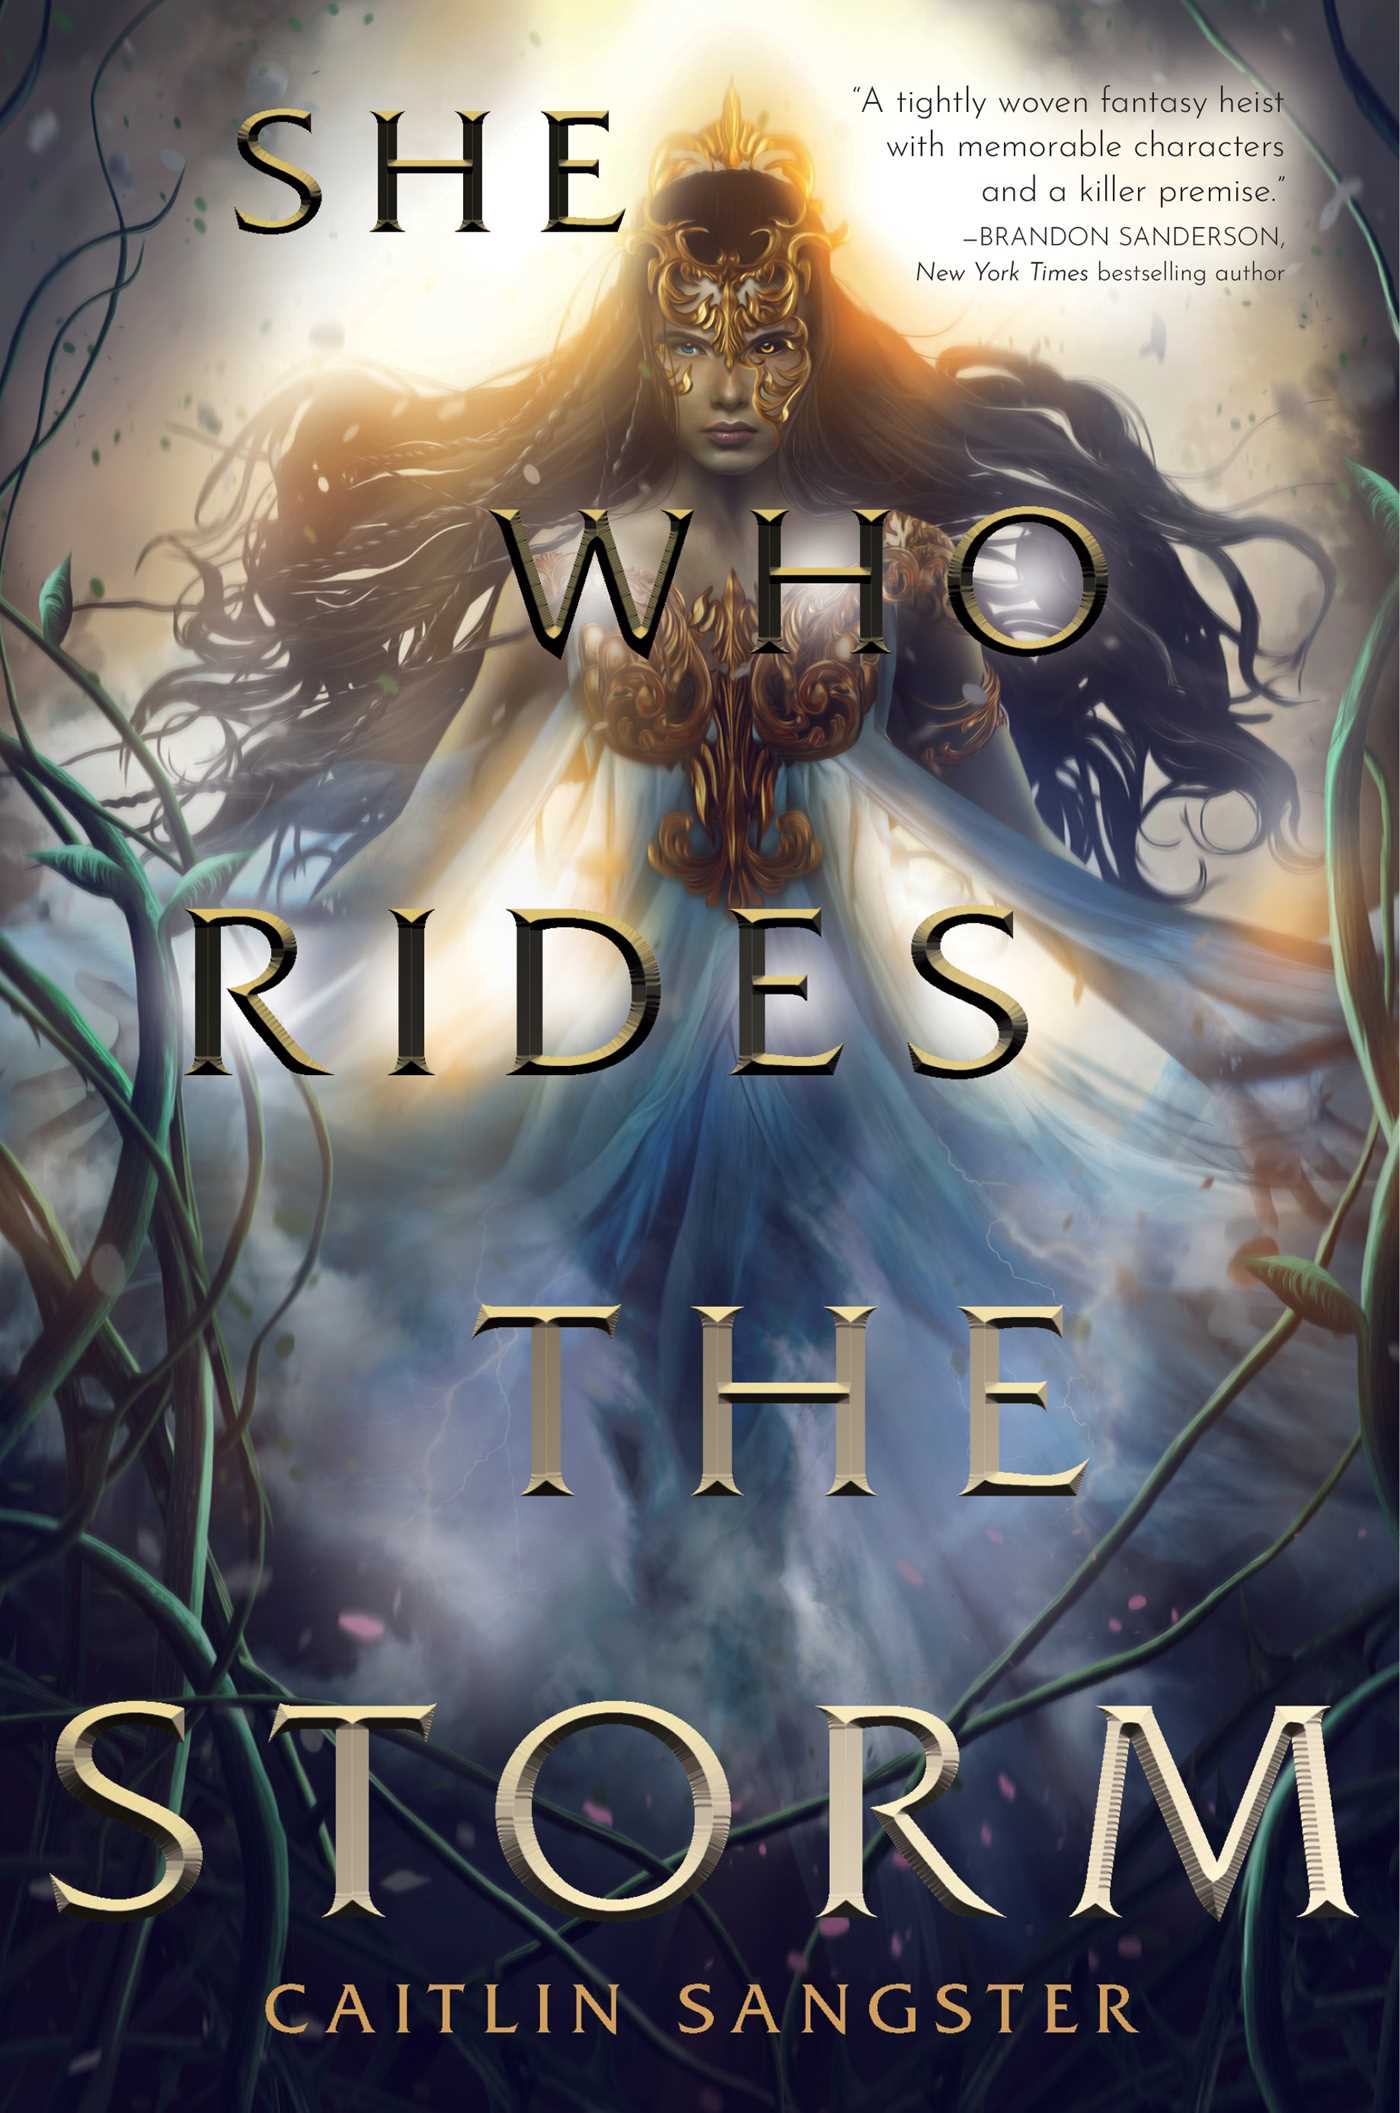 Live event with Caitlin Sangster/She Who Rides the Storm